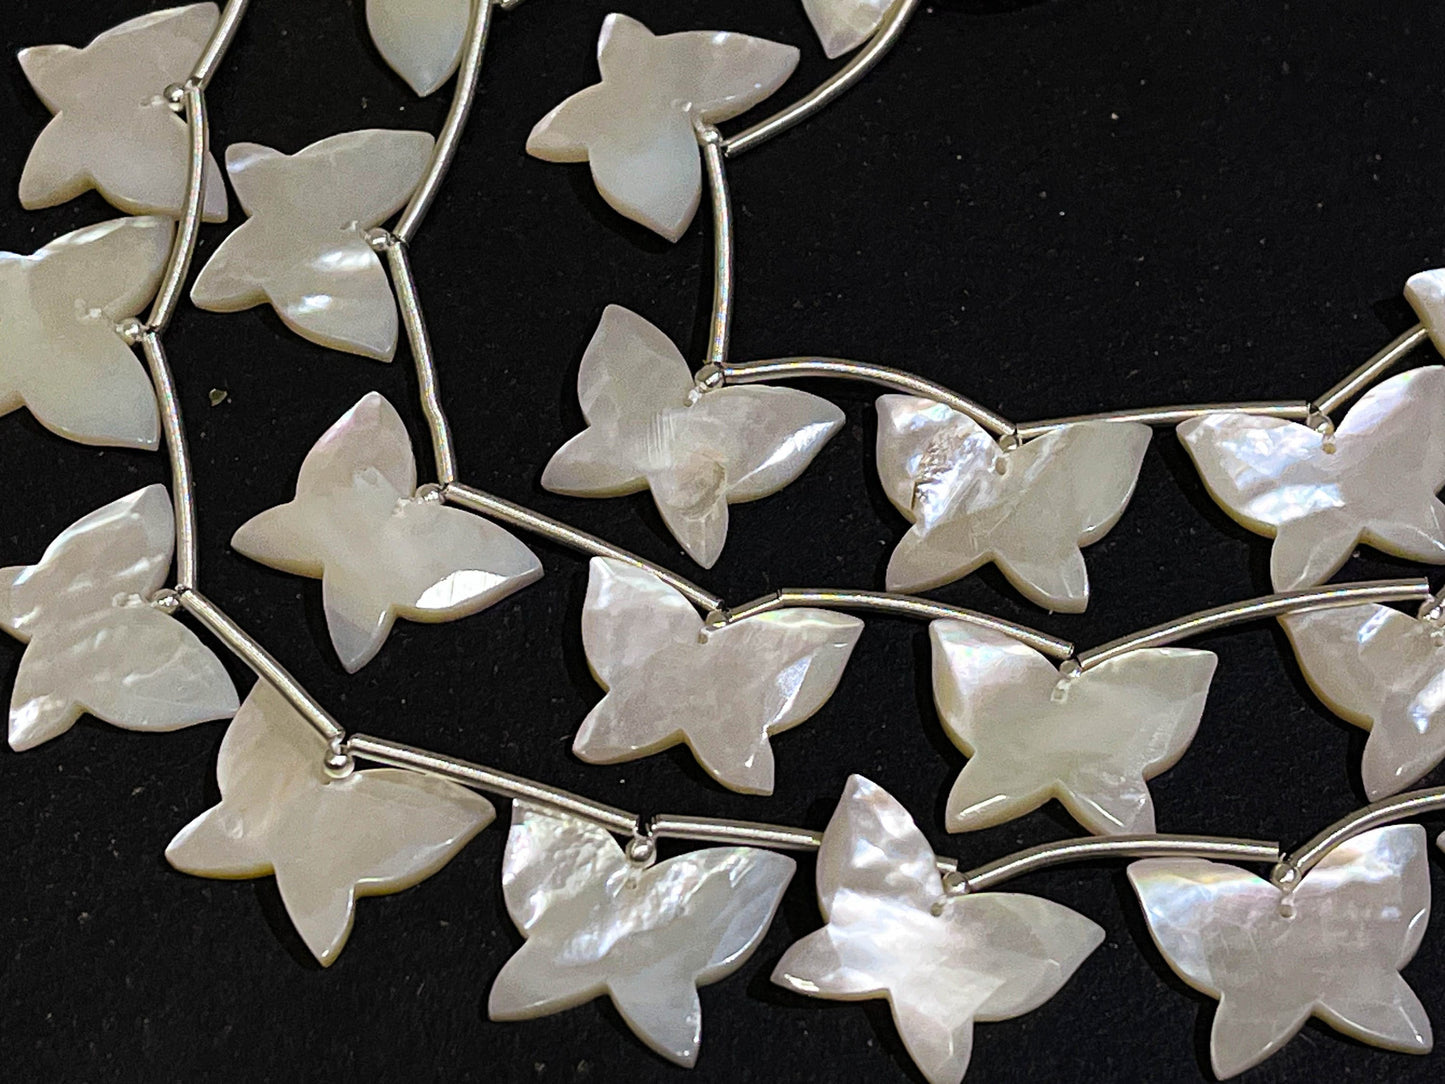 Mother of Pearl Faceted Butterfly Shape Beads, Natural Pearl, Pearl Butterfly, Pearl for Jewelry making, 16x20MM, 10 Pieces, Butterfly Beads